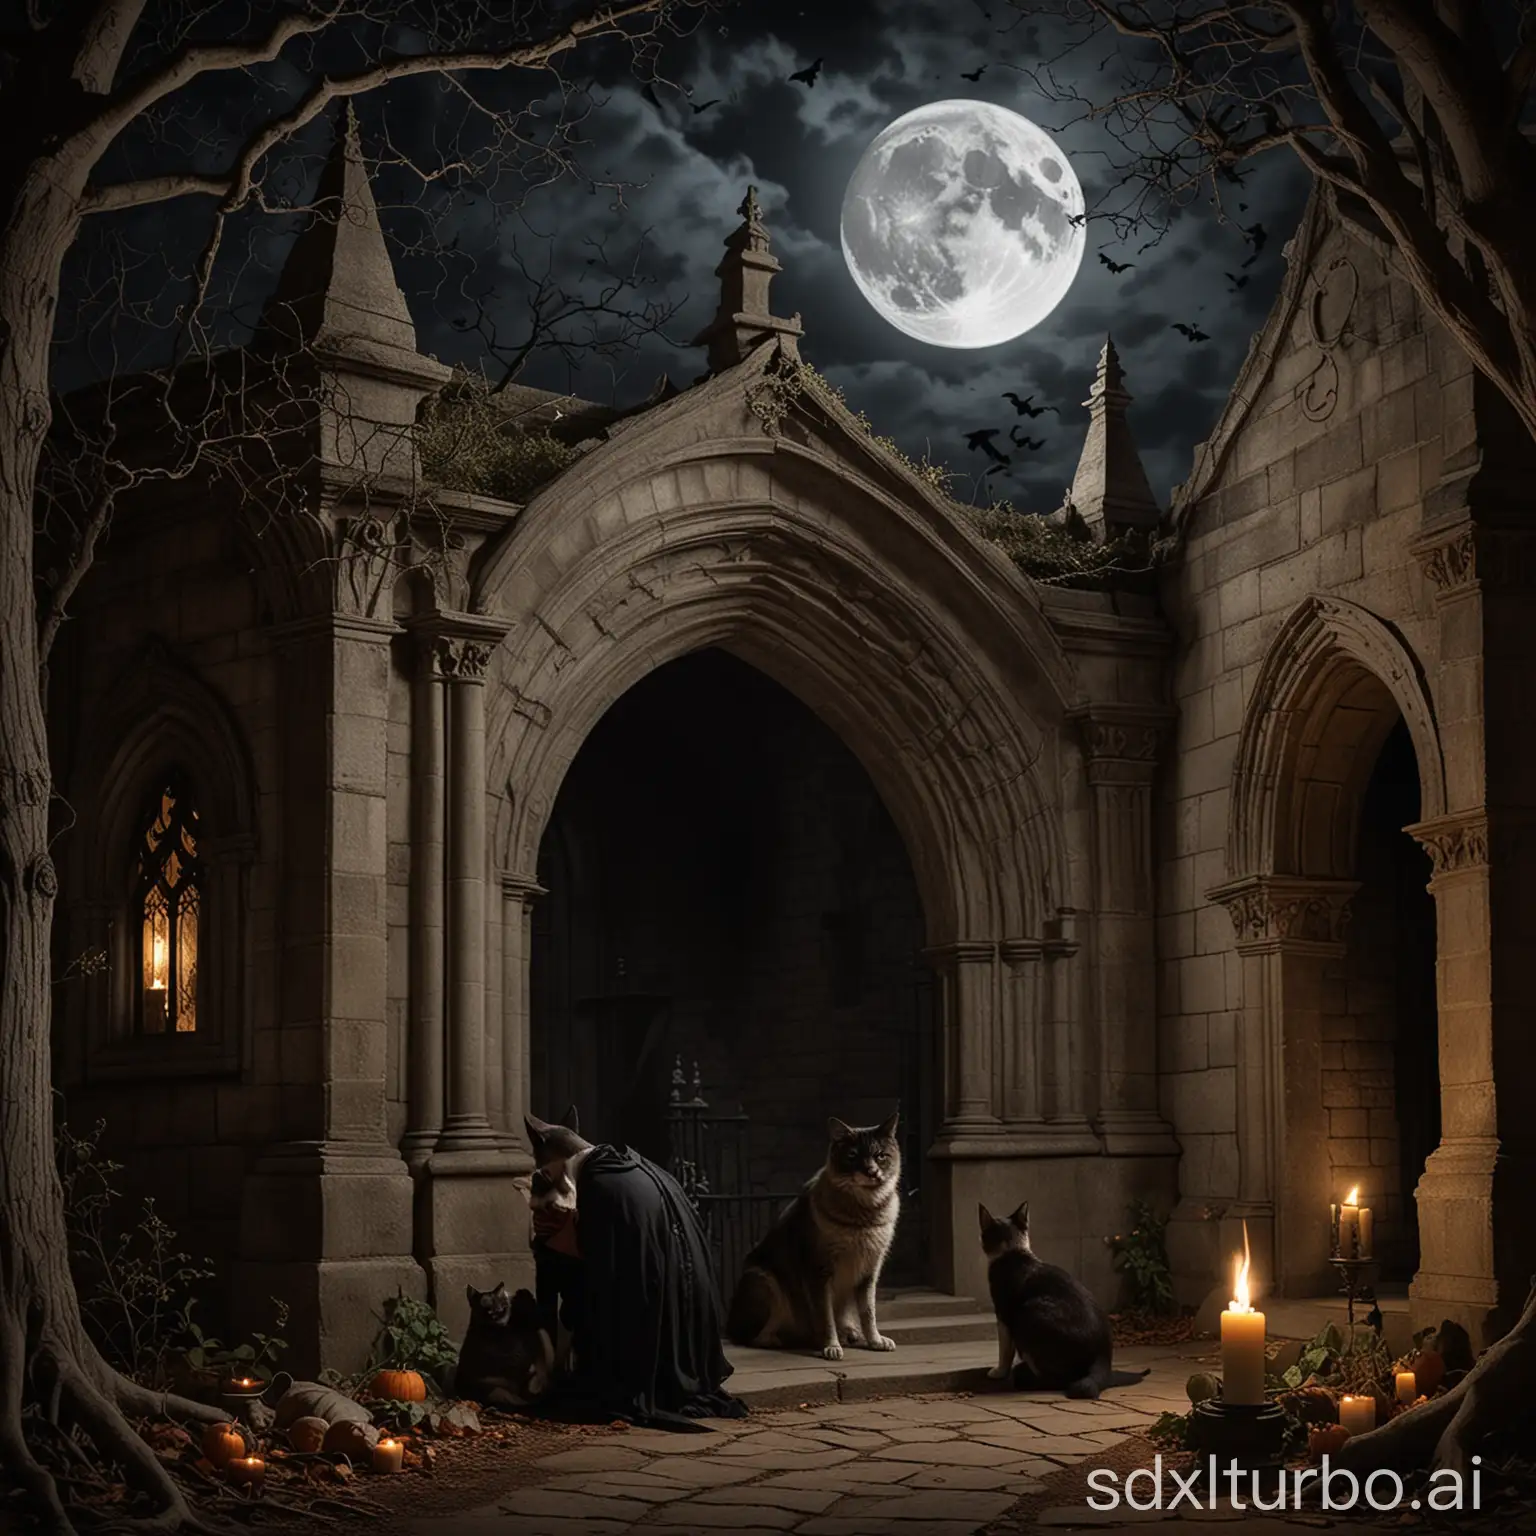 A gothic couple sits romantically in front of an open crypt by candlelight under a half moon. A cat sneaks up. A dog nestles against them and looks at them dreamily. A bat hangs on a tree. A vampire sneaks up from behind.